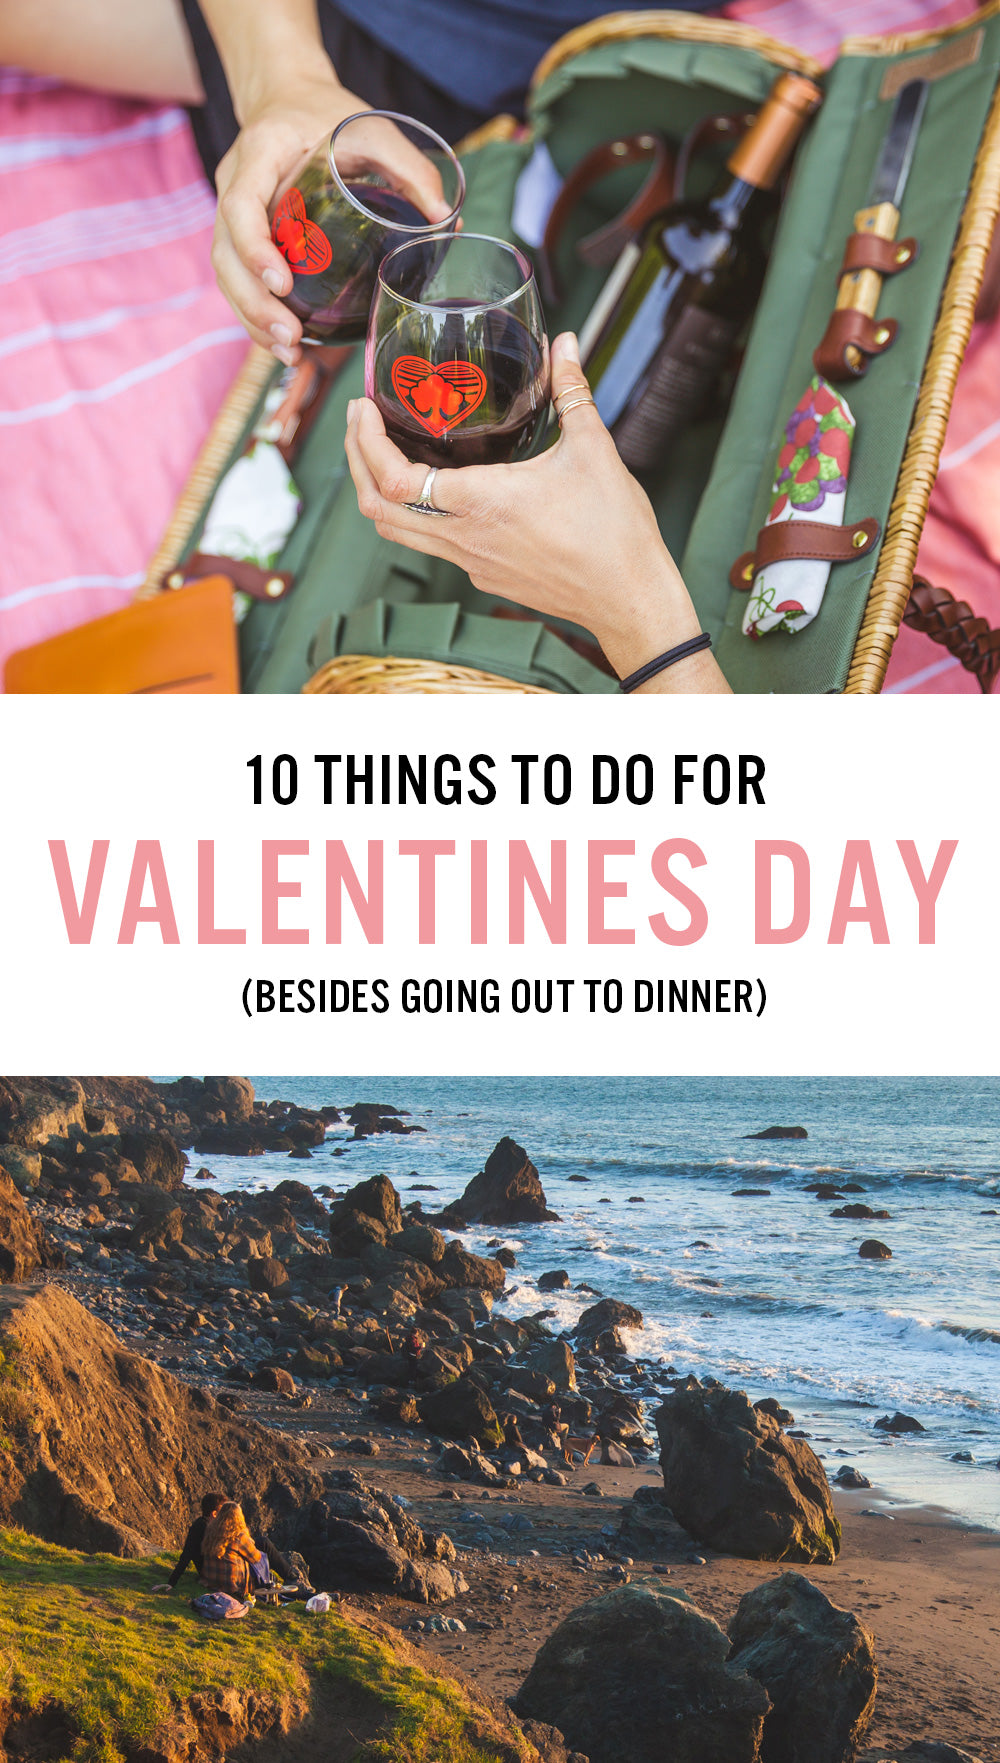 10 Things To Do For Valentines Day (Besides Going Out To Dinner)